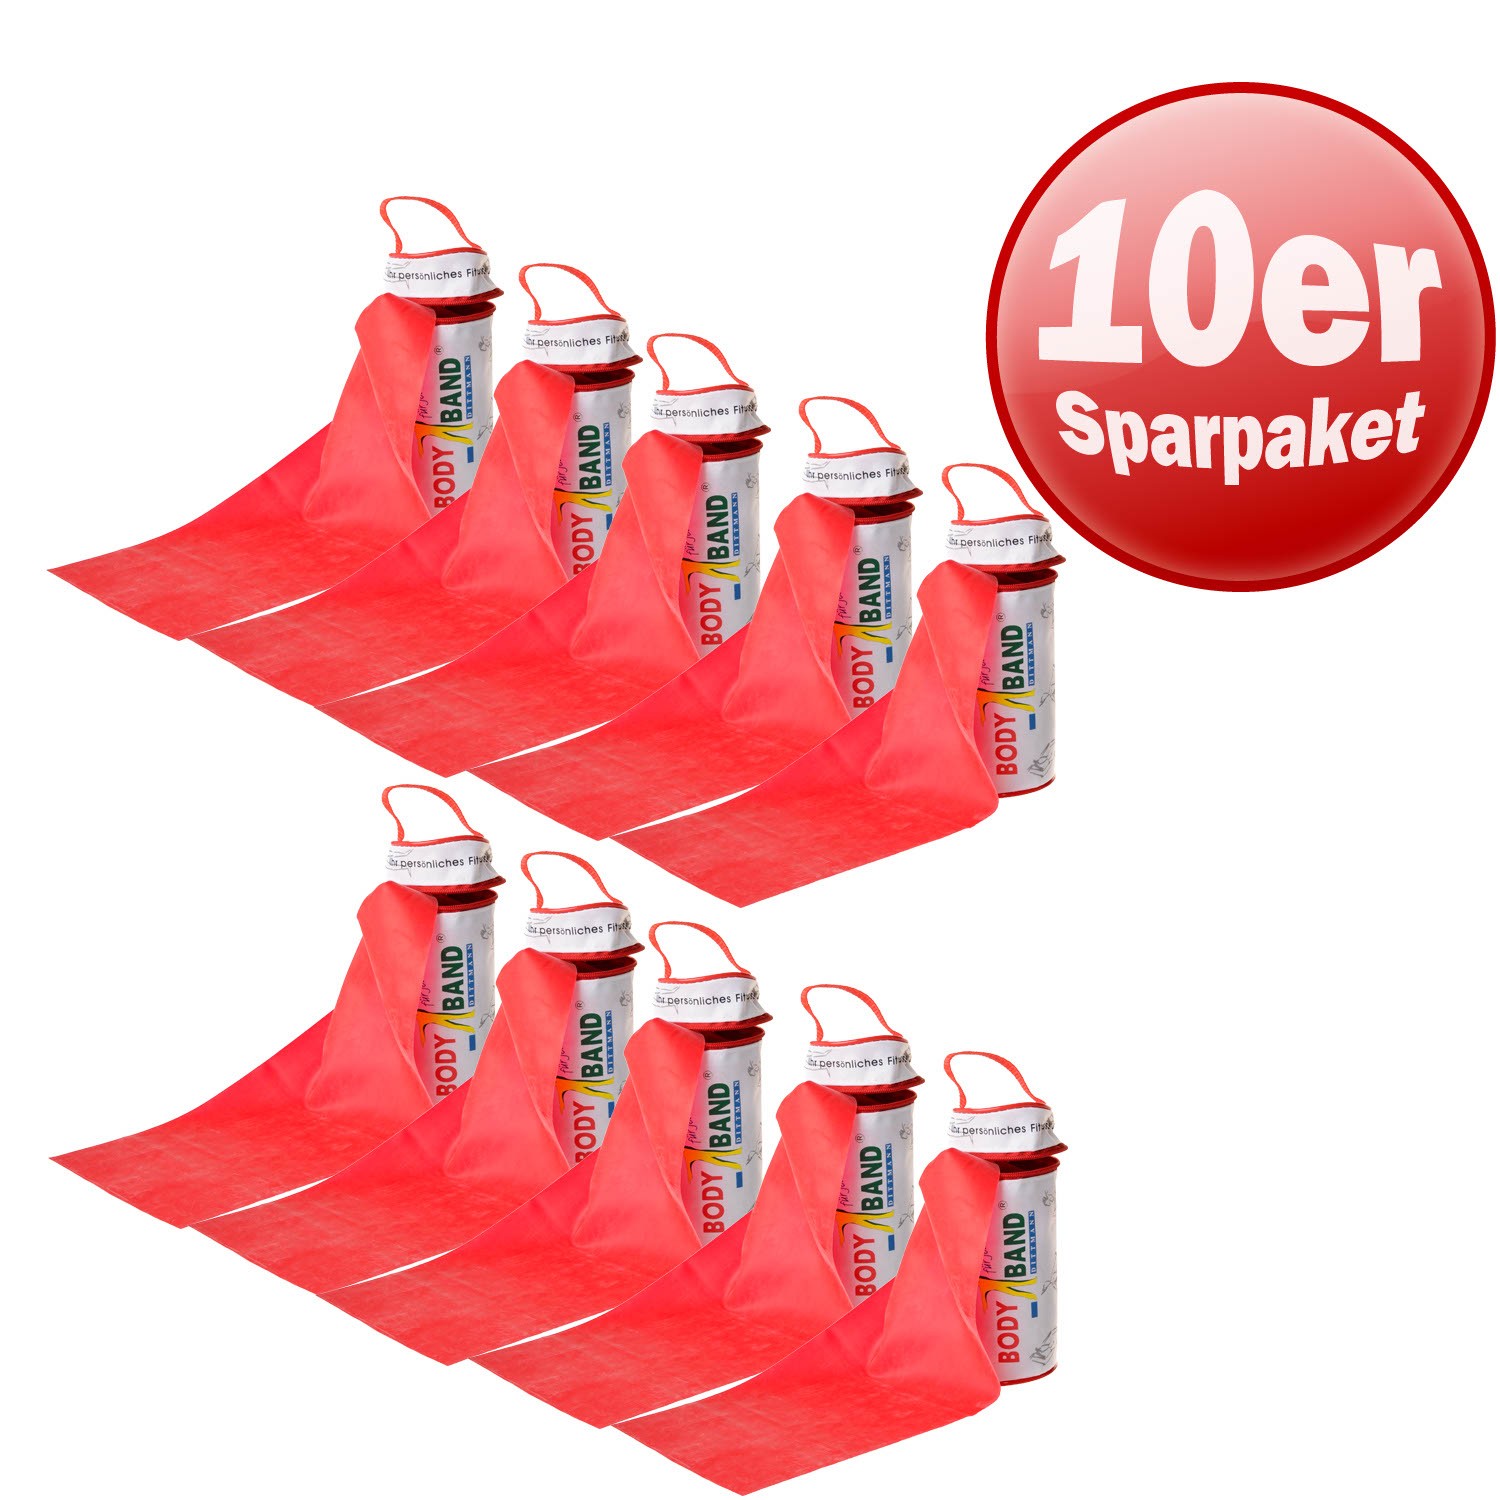 10er Pack Bodyband PROTECT 2.5m - mittel